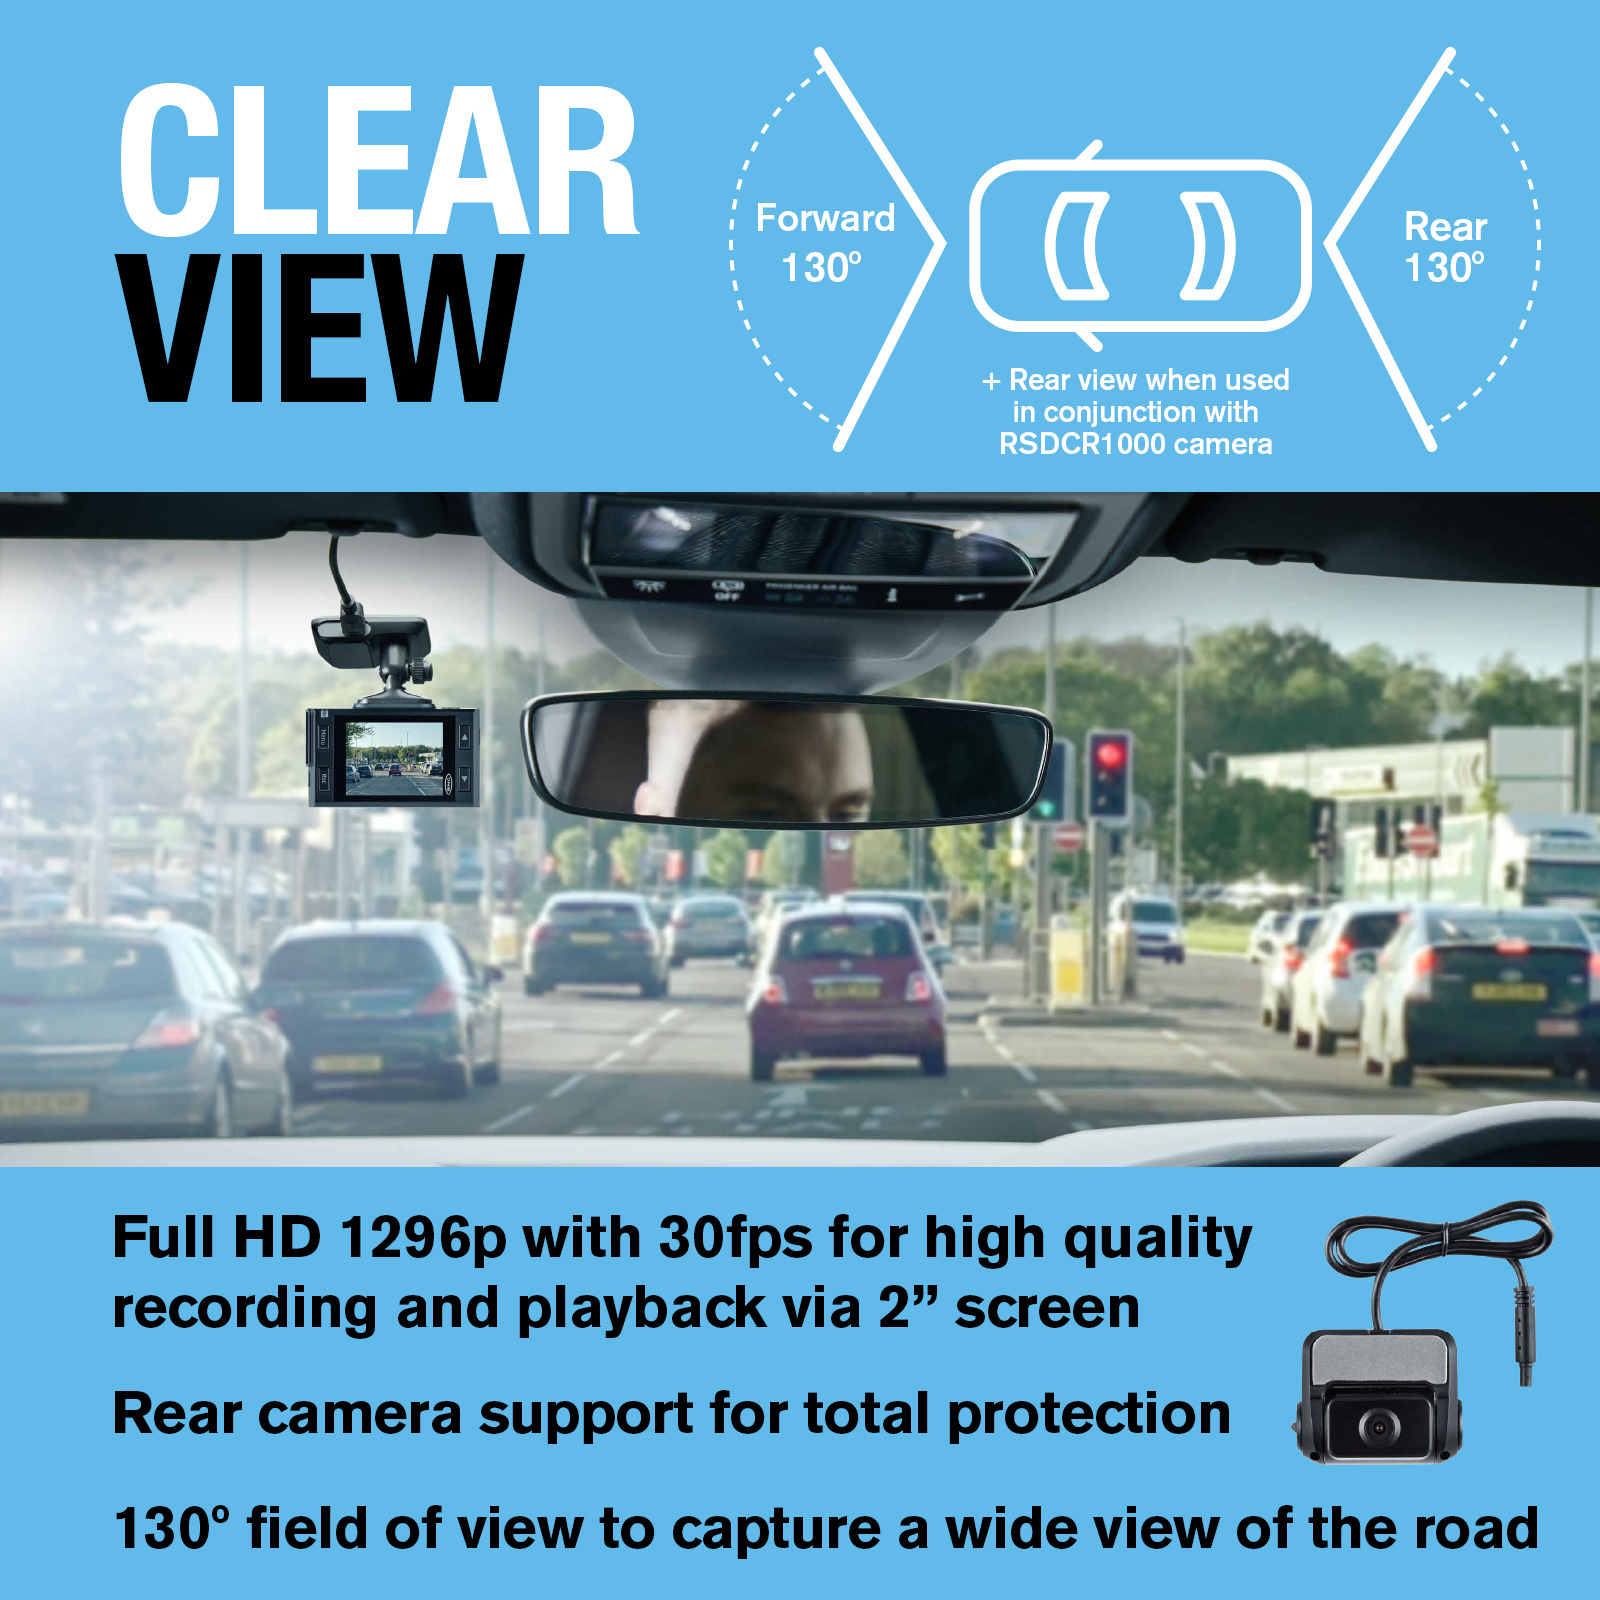 https://www.ringautomotive.com/files/myimages/product/Dash%20camera/RSDC3000/14106%20AMZ%20Square%20RSDC3000%2004%20Clear%20View%201600x1600px.jpg